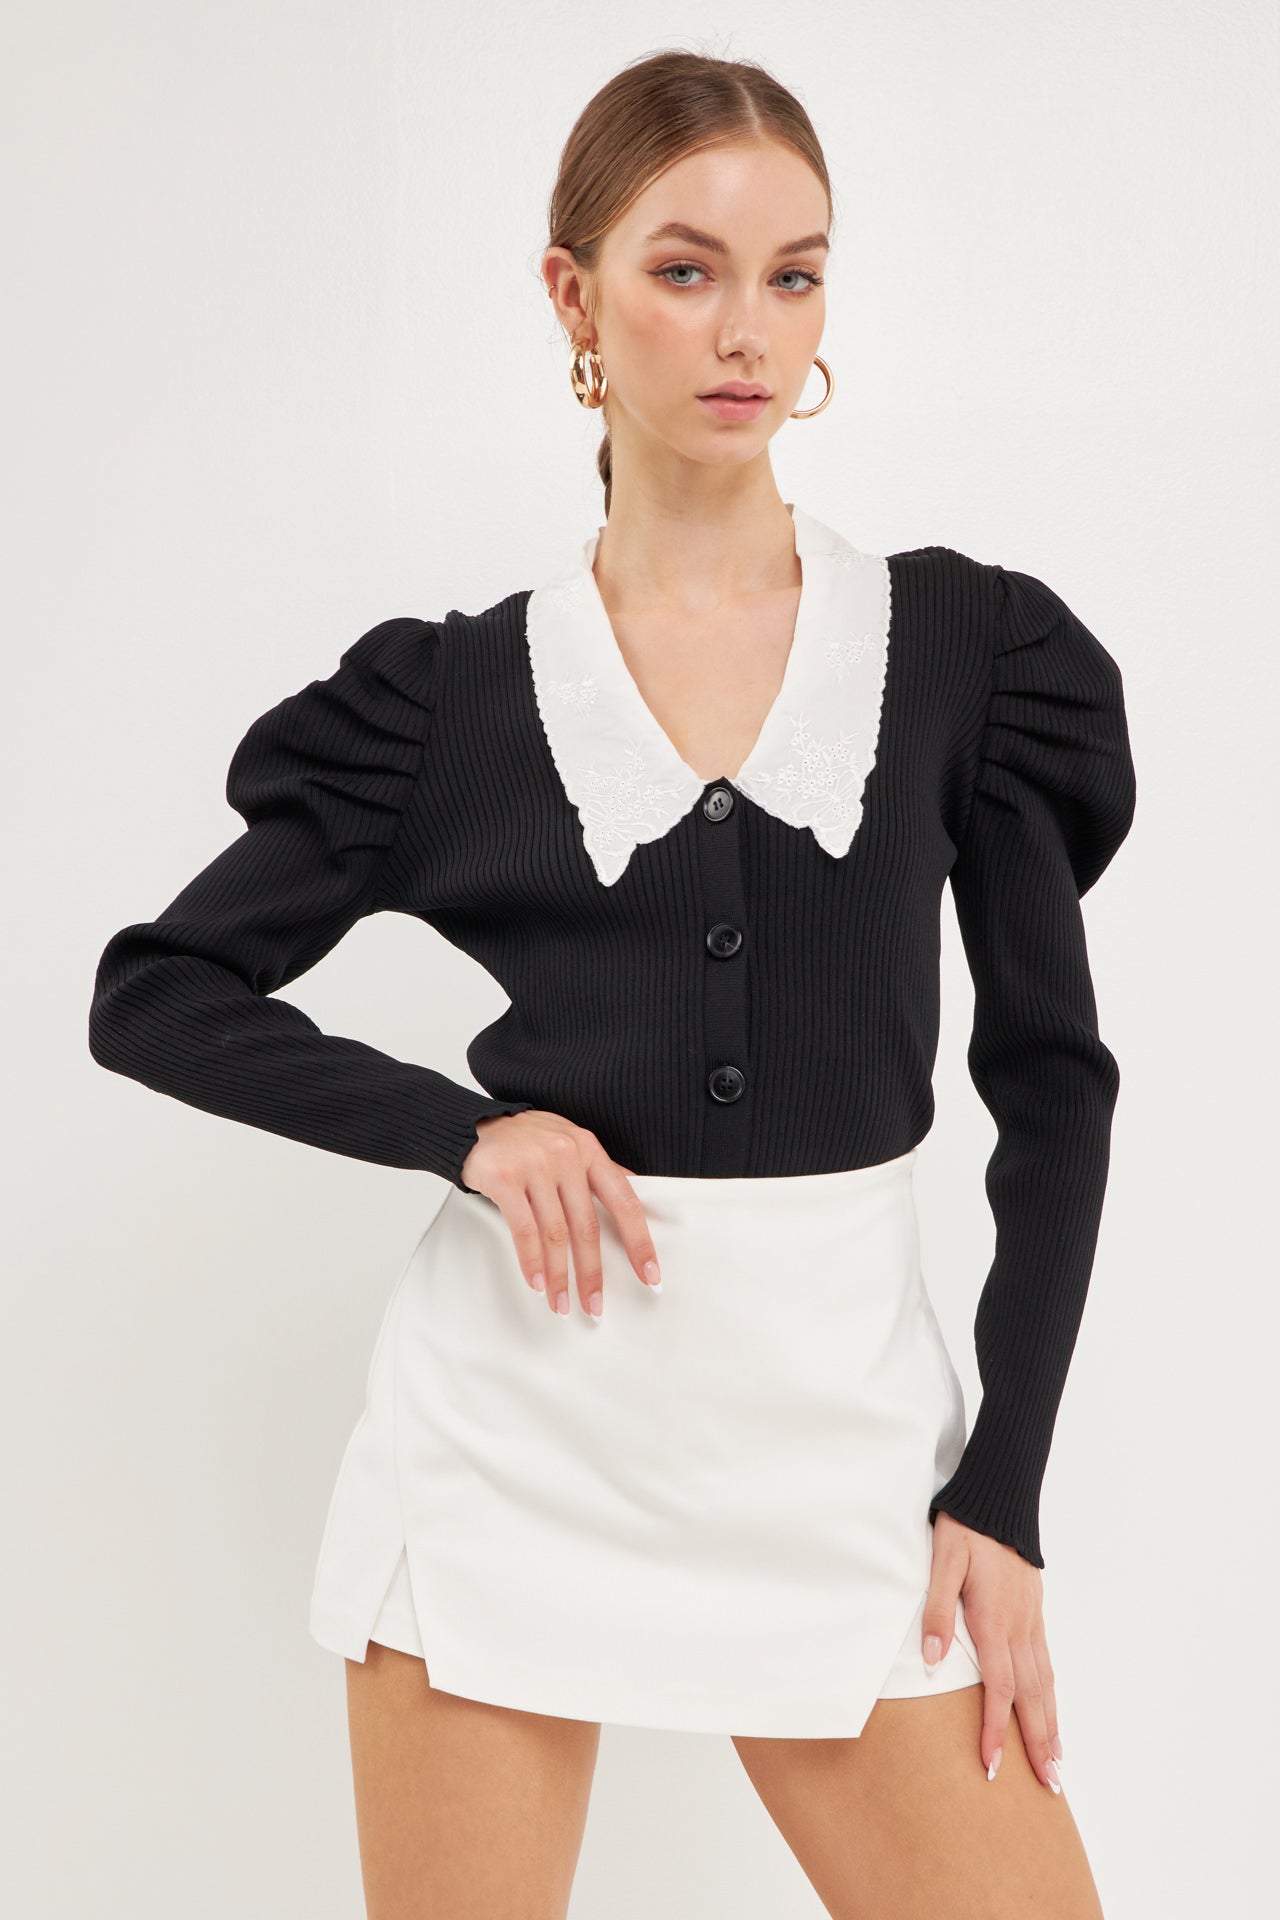 ENDLESS ROSE - Embroidered Collar Knit Cardigan - SWEATERS & KNITS available at Objectrare